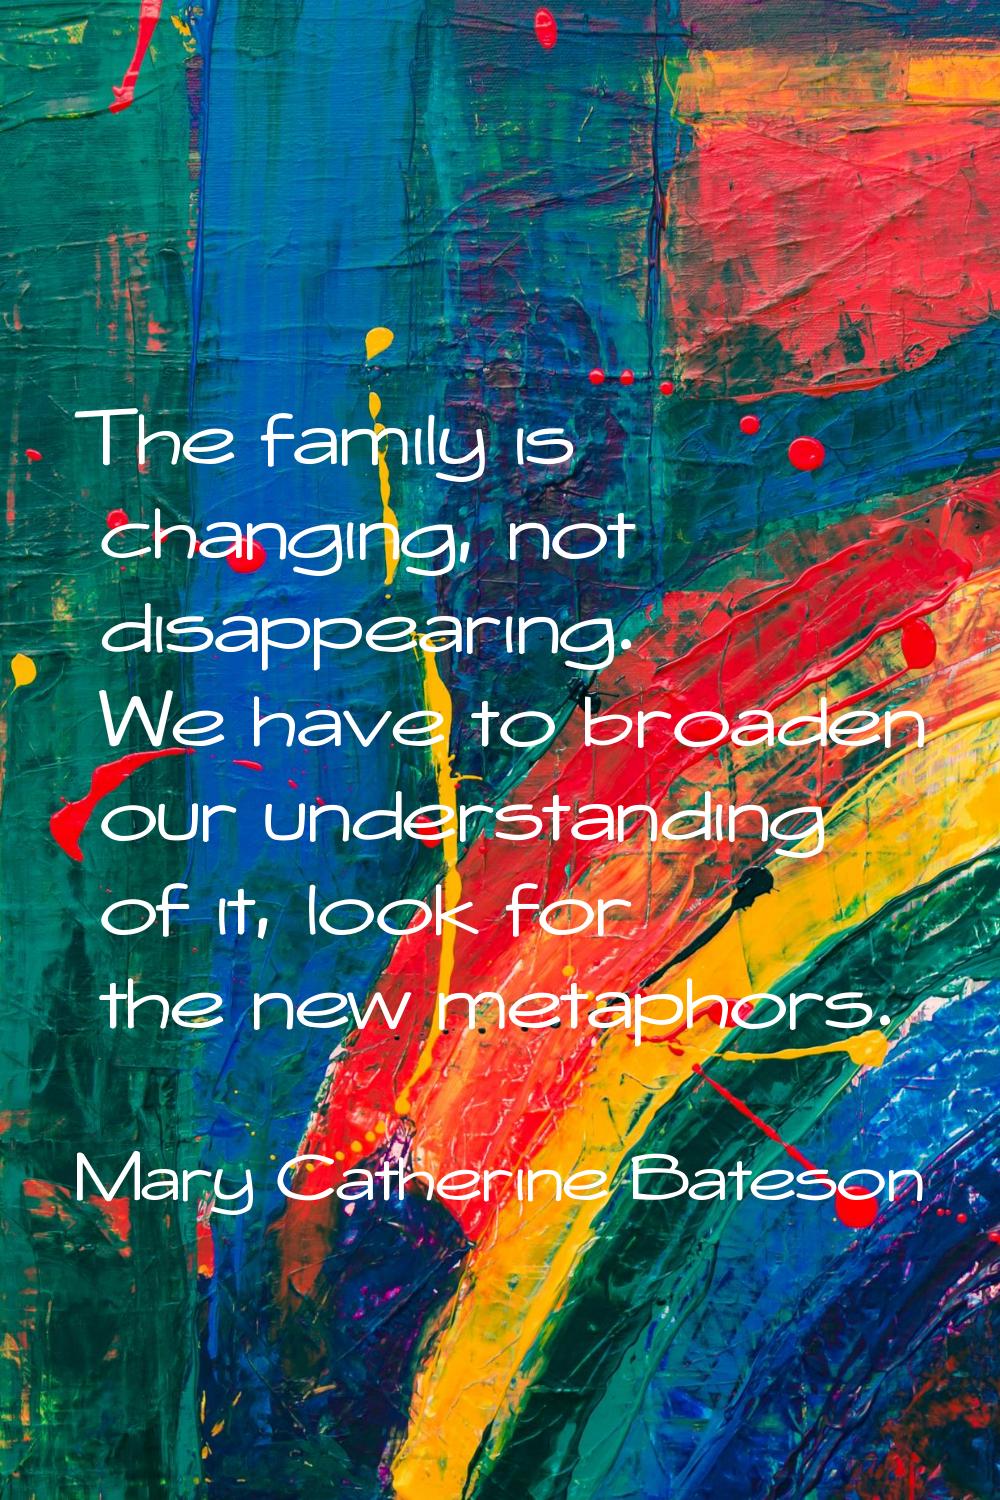 The family is changing, not disappearing. We have to broaden our understanding of it, look for the 